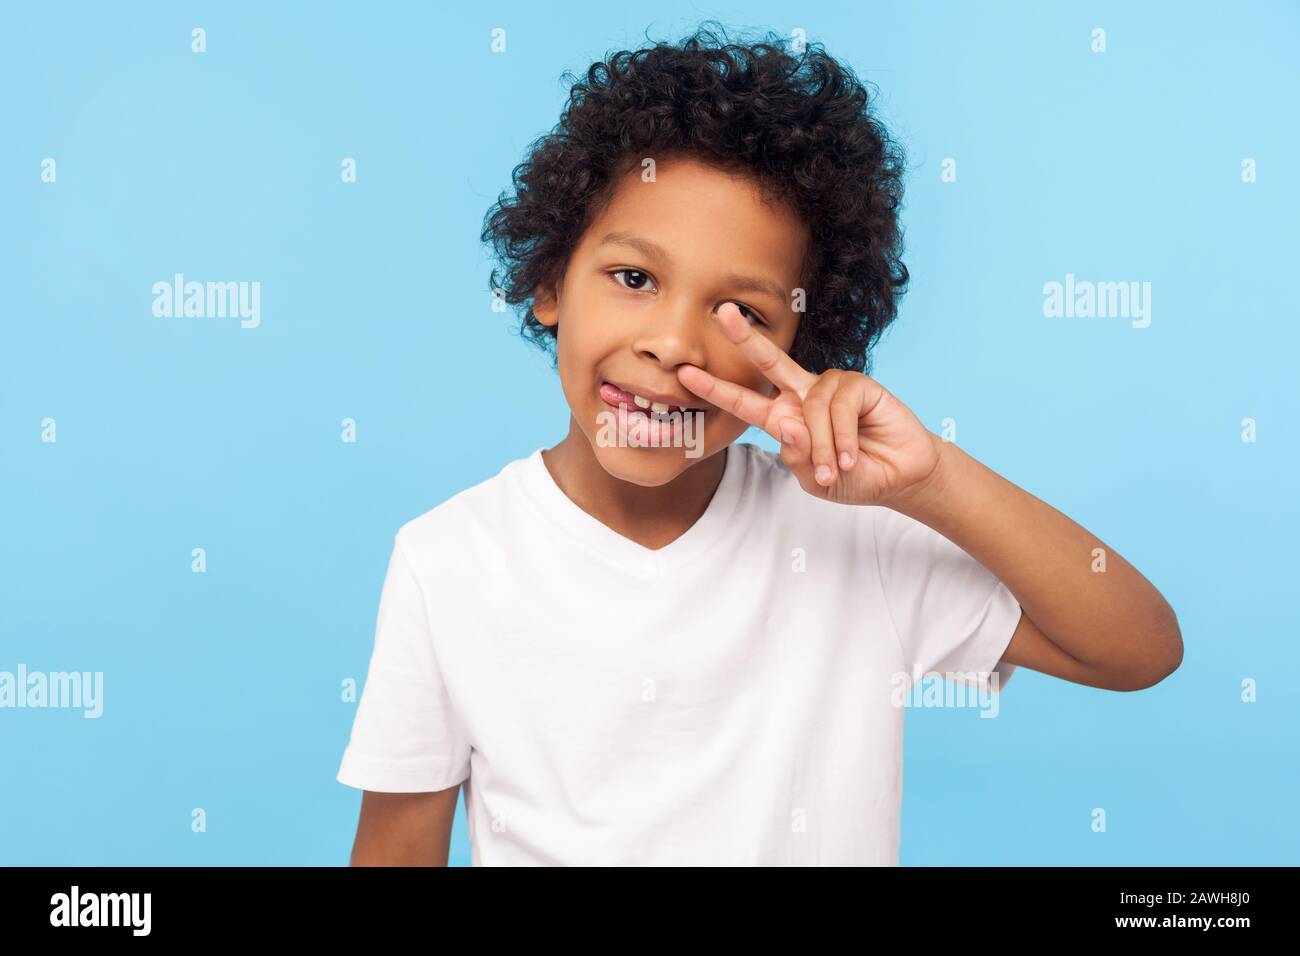 Portrait of cheerful carefree little boy with curly hair in T-shirt picking nose and sticking out tongue with happy face, having fun, bad manners conc Stock Photo